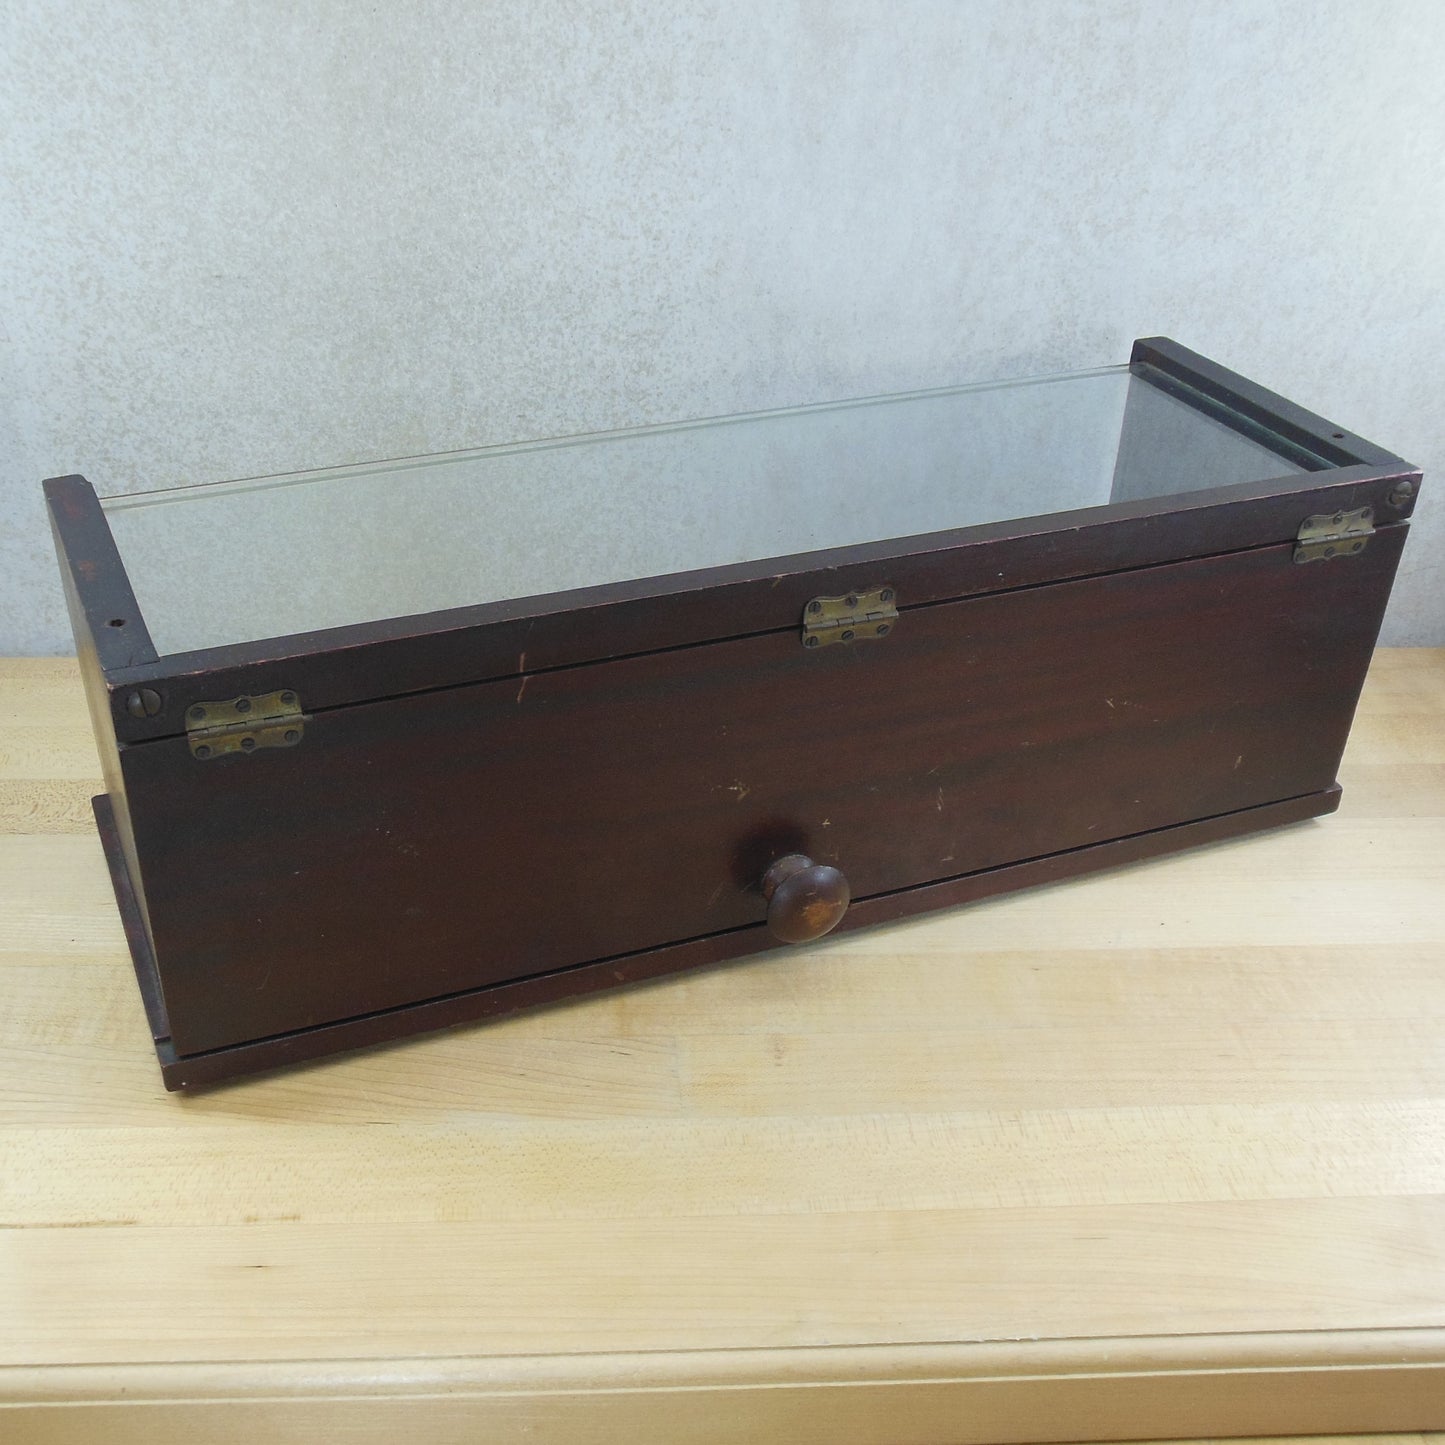 Sealpackerchief Antique Mahogany Glass General Dept. Store Display Case Used